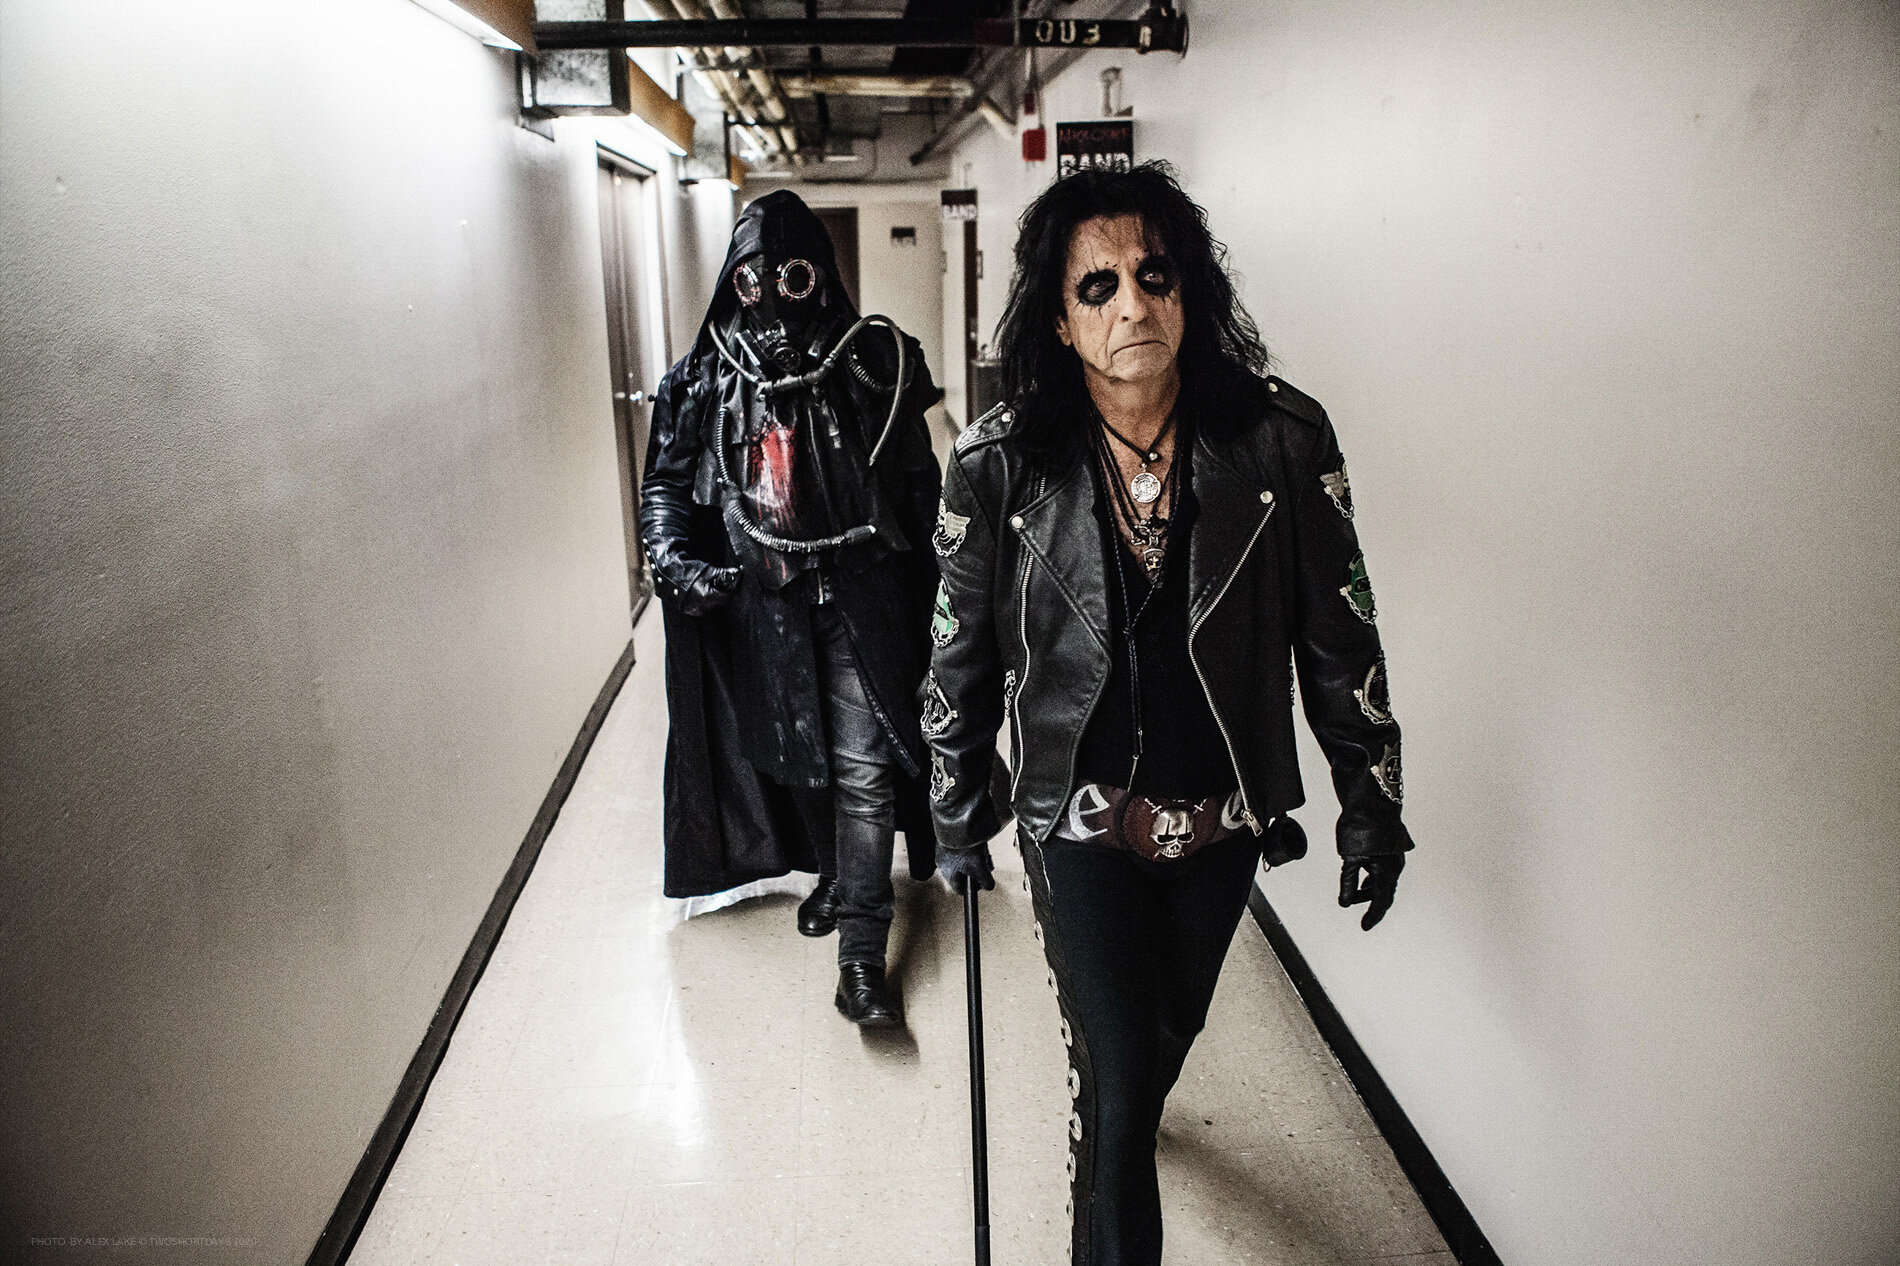 alice_cooper_photography_copyright_ALEX_LAKE_do_not_reproduce_without_permission_TWOSHORTDAYS.jpg